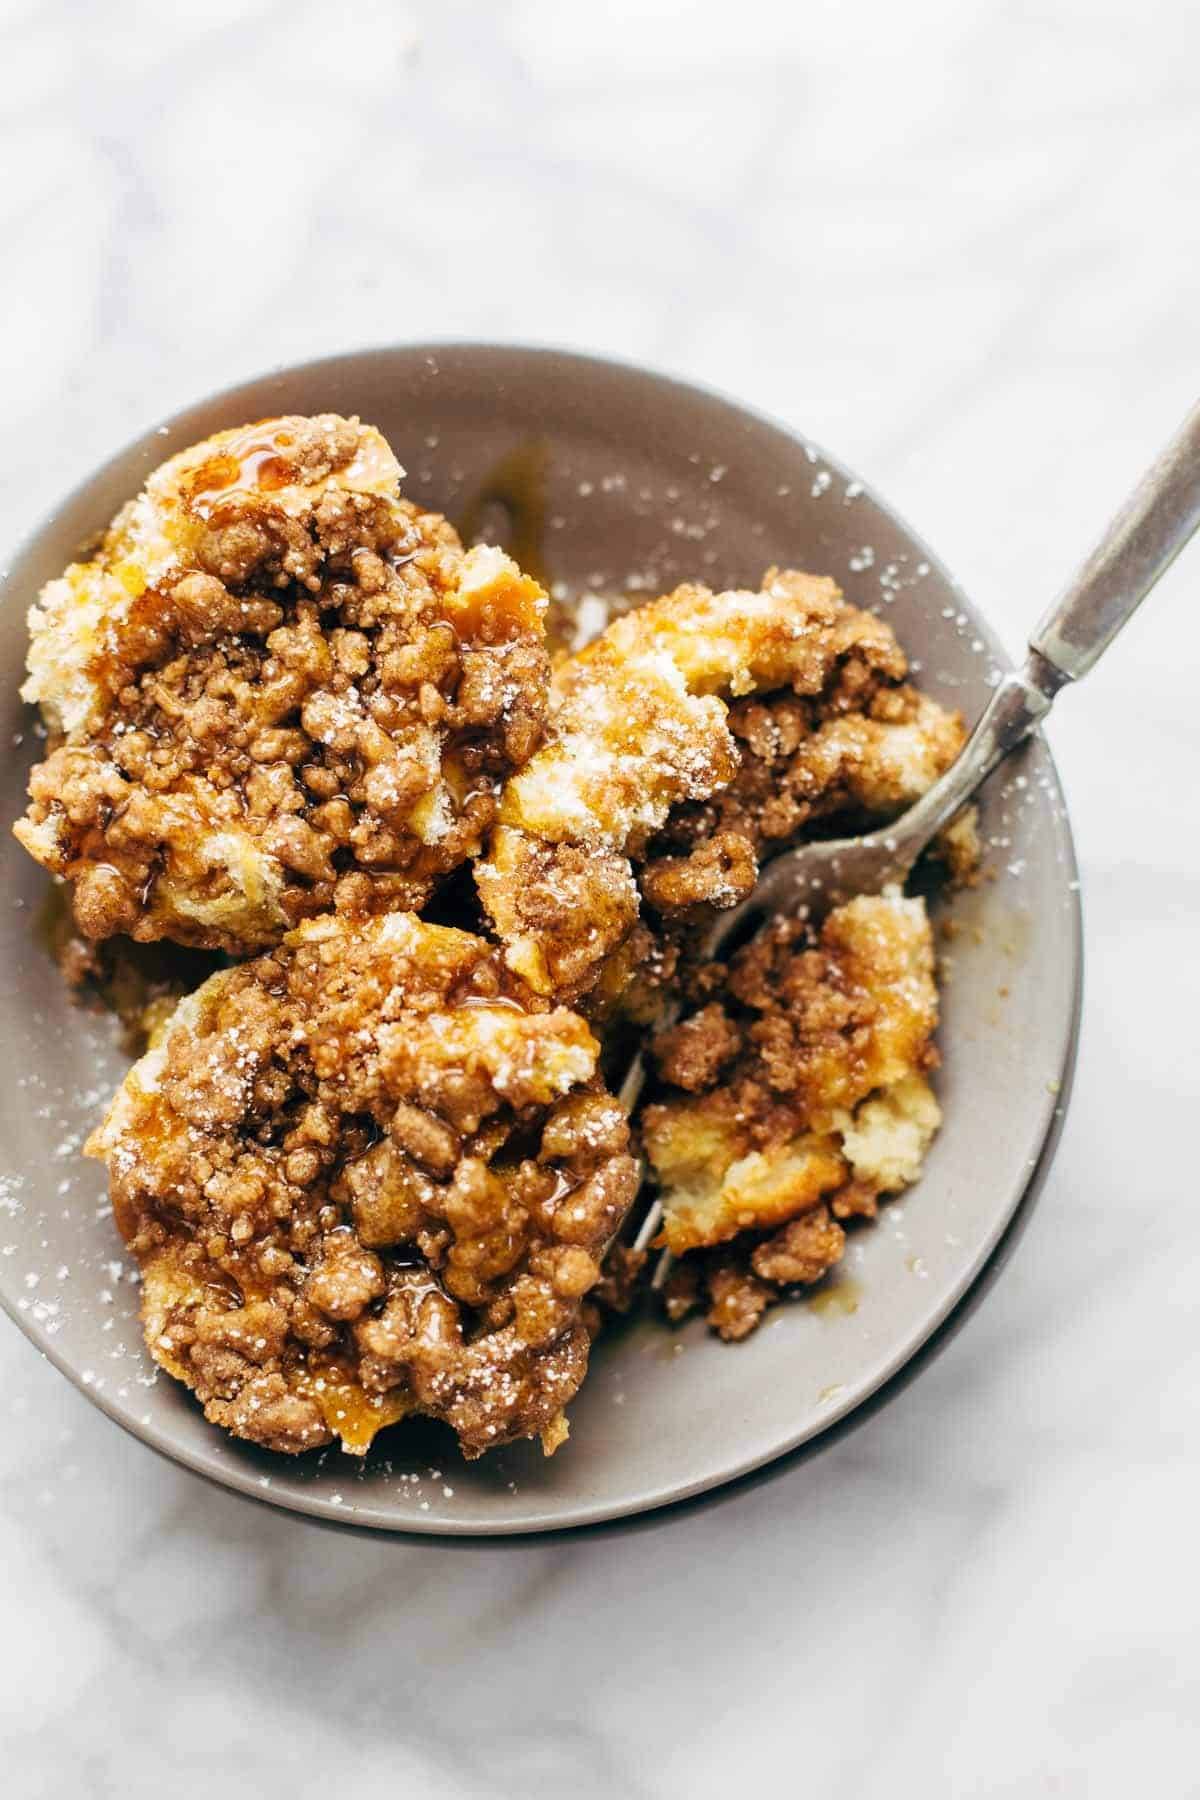 Cinnamon Streusel French Toast Cups - perfect little bites of French Toast for an easy brunch recipe! loaded to the brim with cinnamon streusel. SO good! | pinchofyum.com